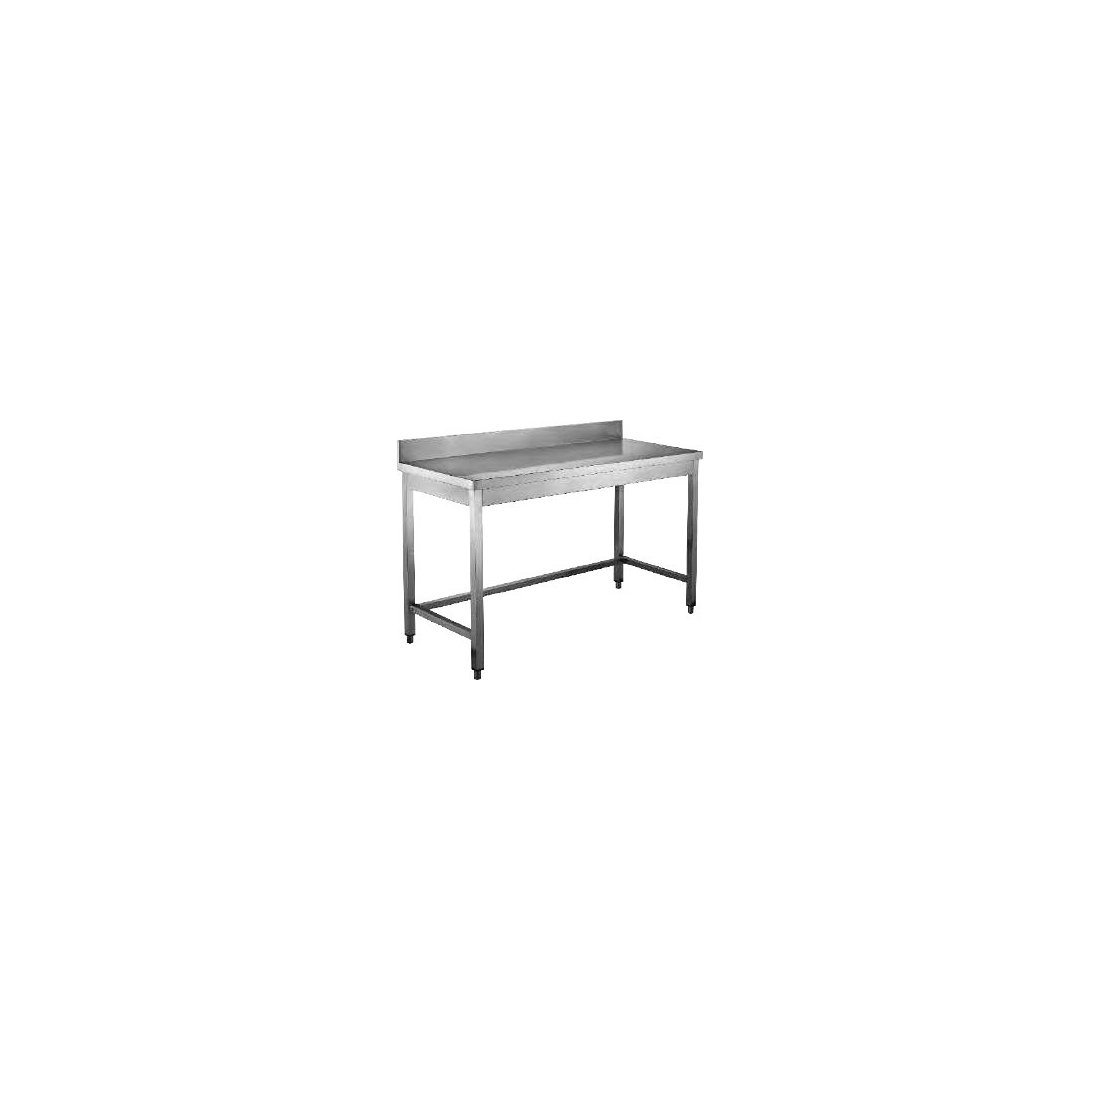 Stainless Steel Service Table with backsplash 1.8m (WTD-181B)